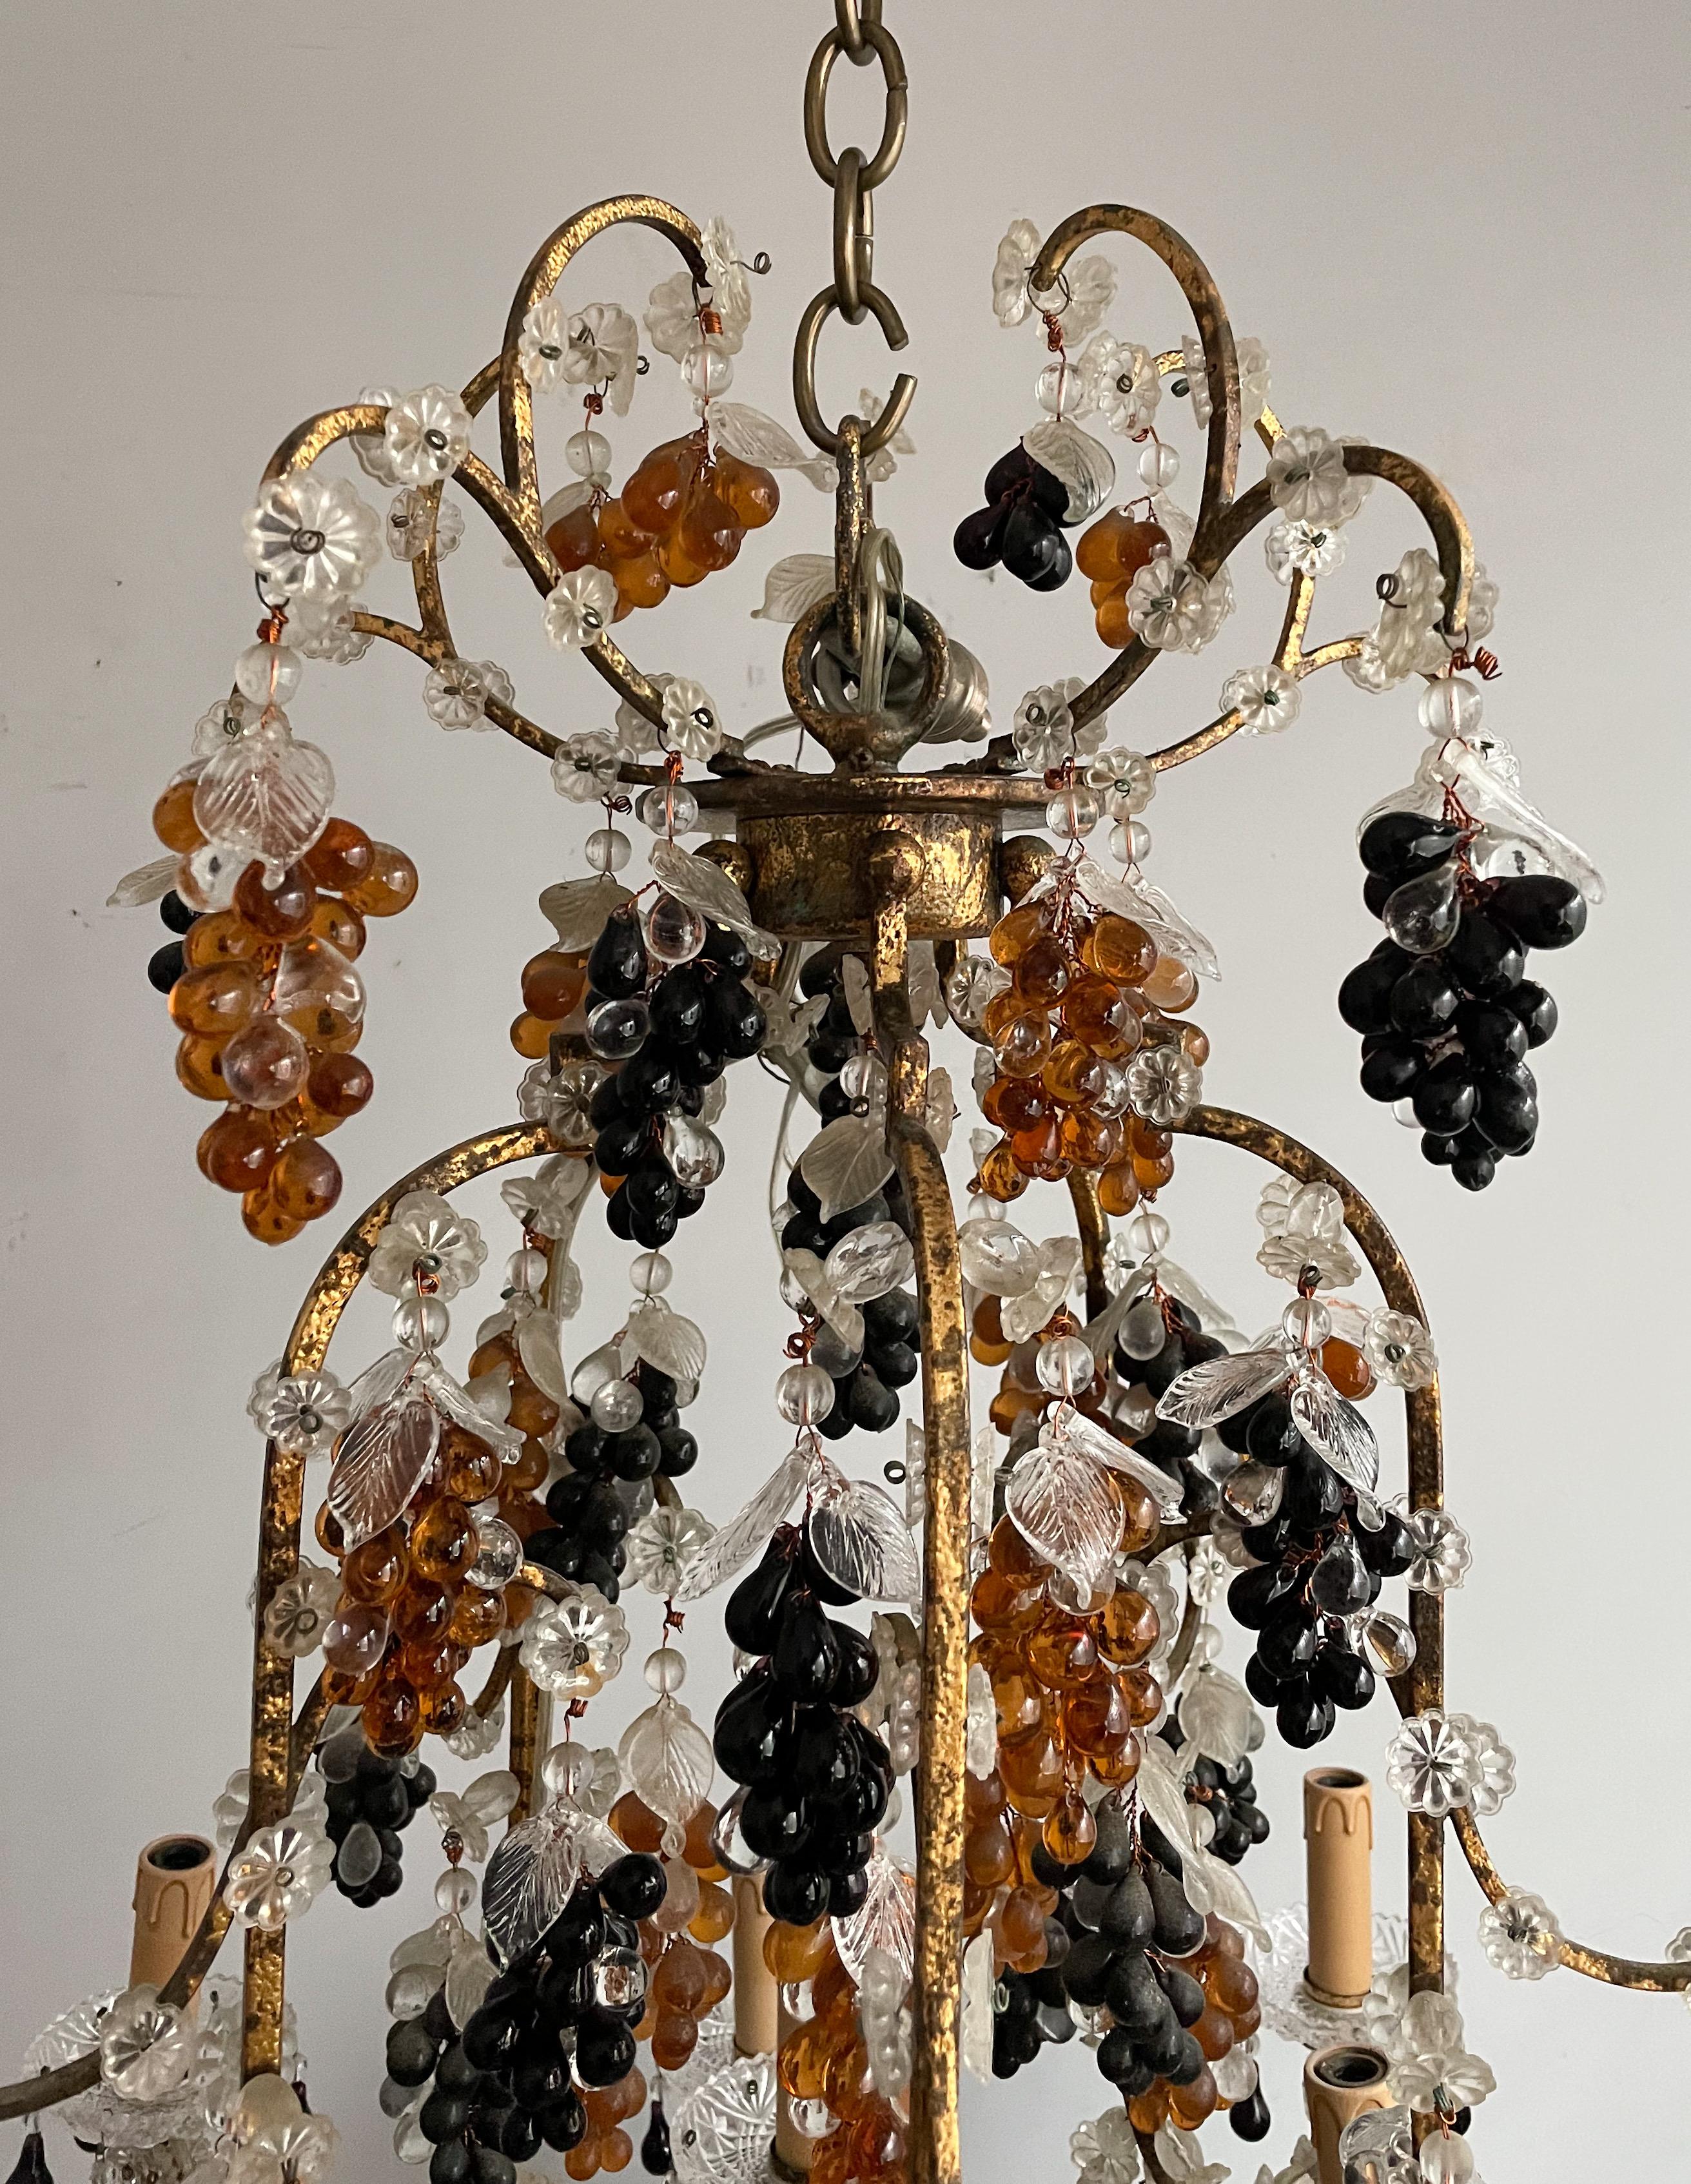 French Provincial Italian Gilt-Iron And Murano Glass Chandelier 